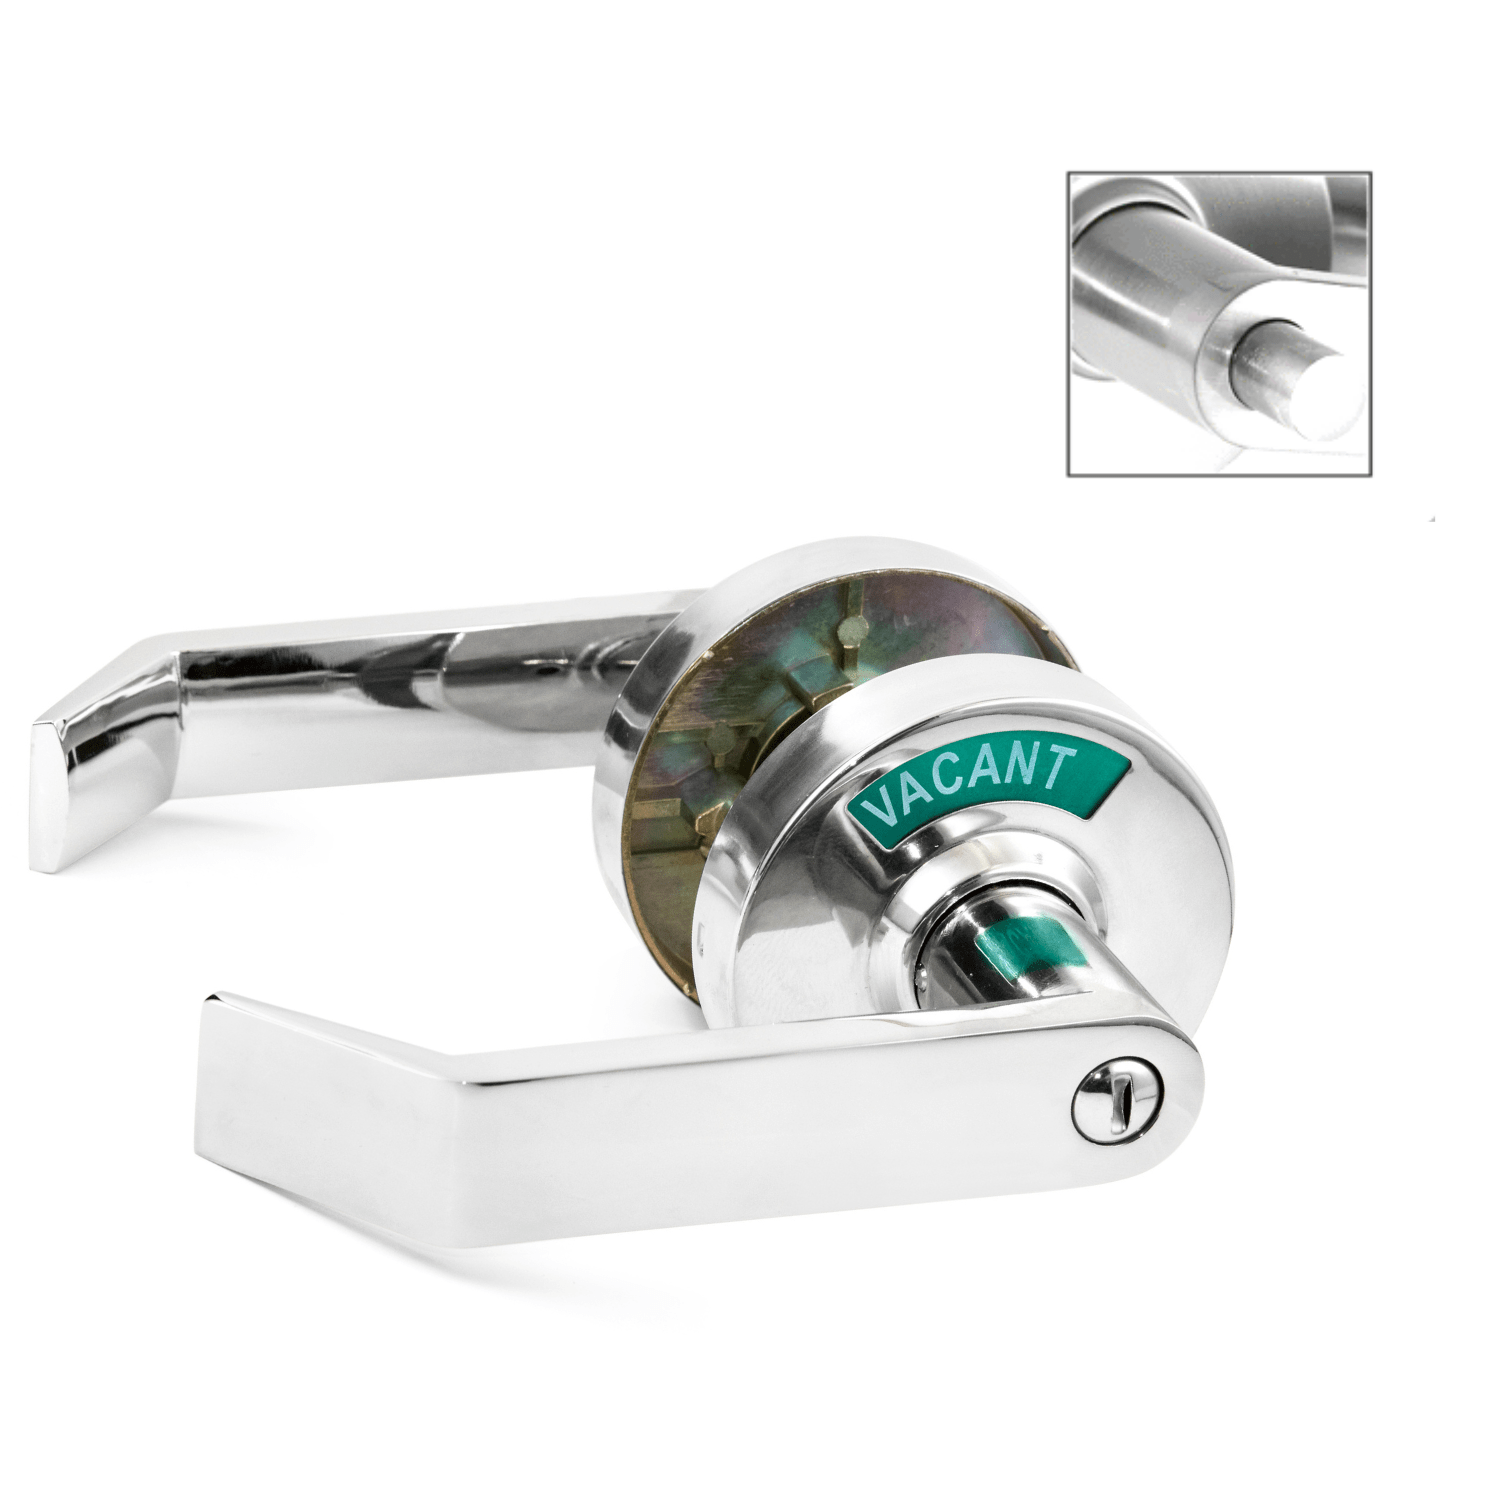 ADA Door Lock with Indicator in Polished Chrome - Left-Handed